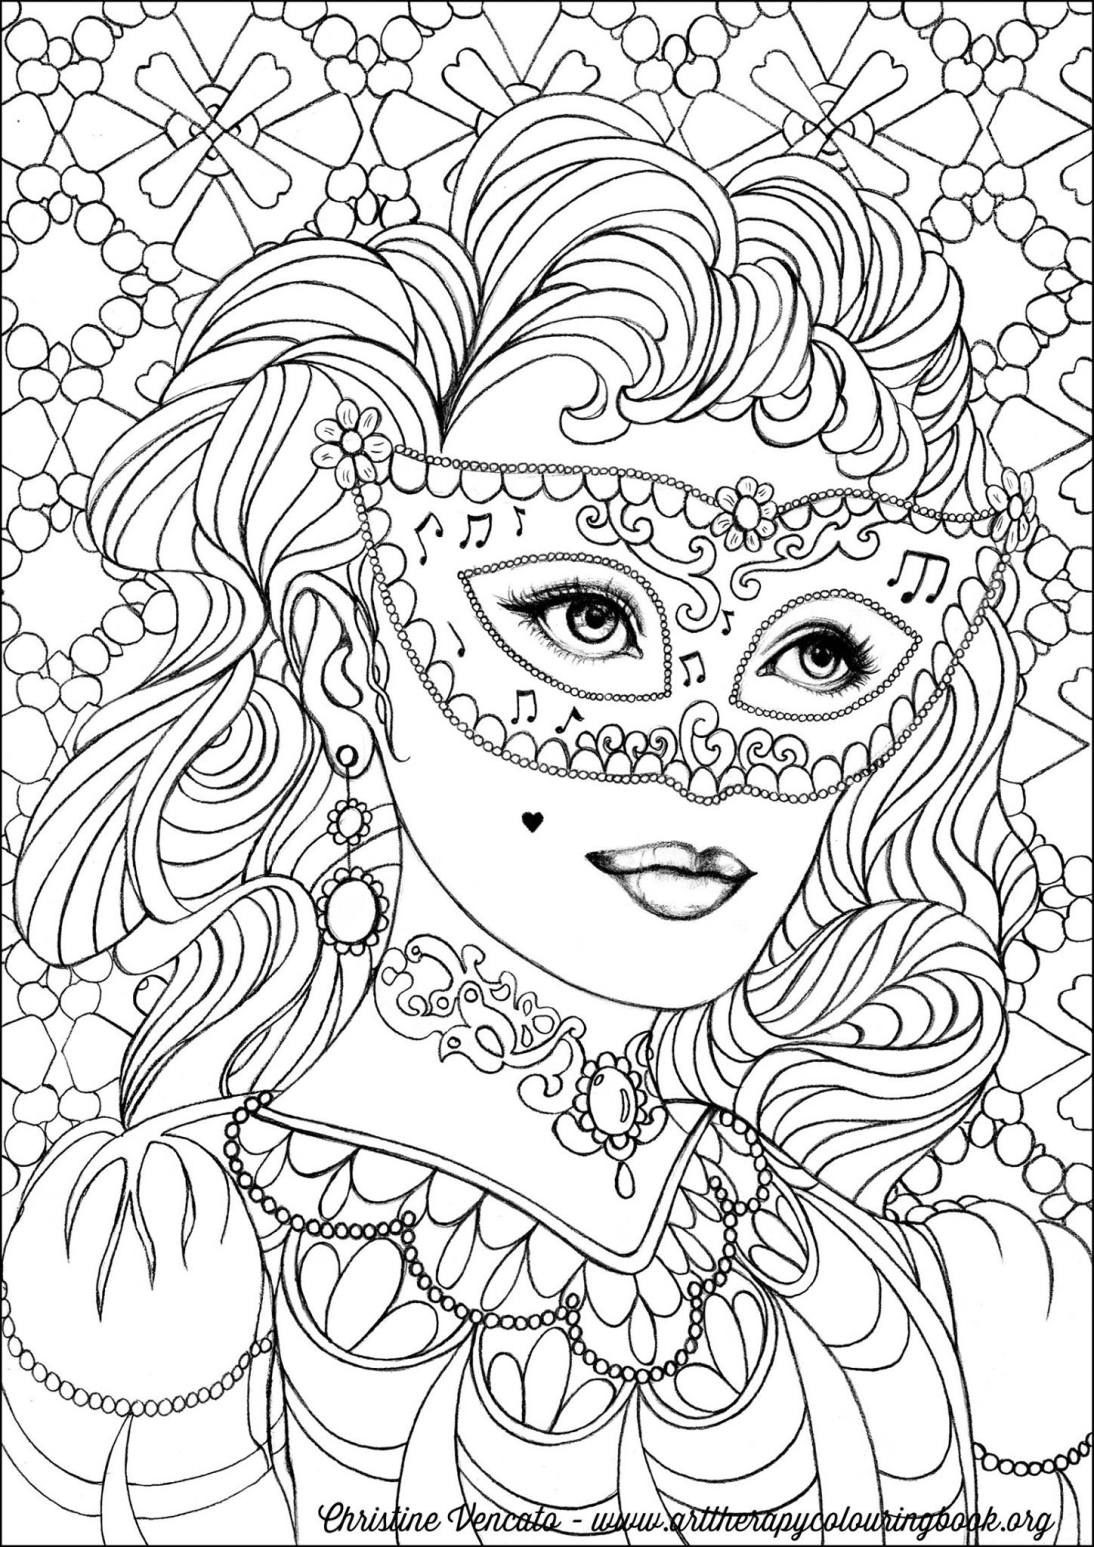 Coloring Pages For Adults Printable Free
 Free Coloring Page From Adult Coloring Worldwide Art by